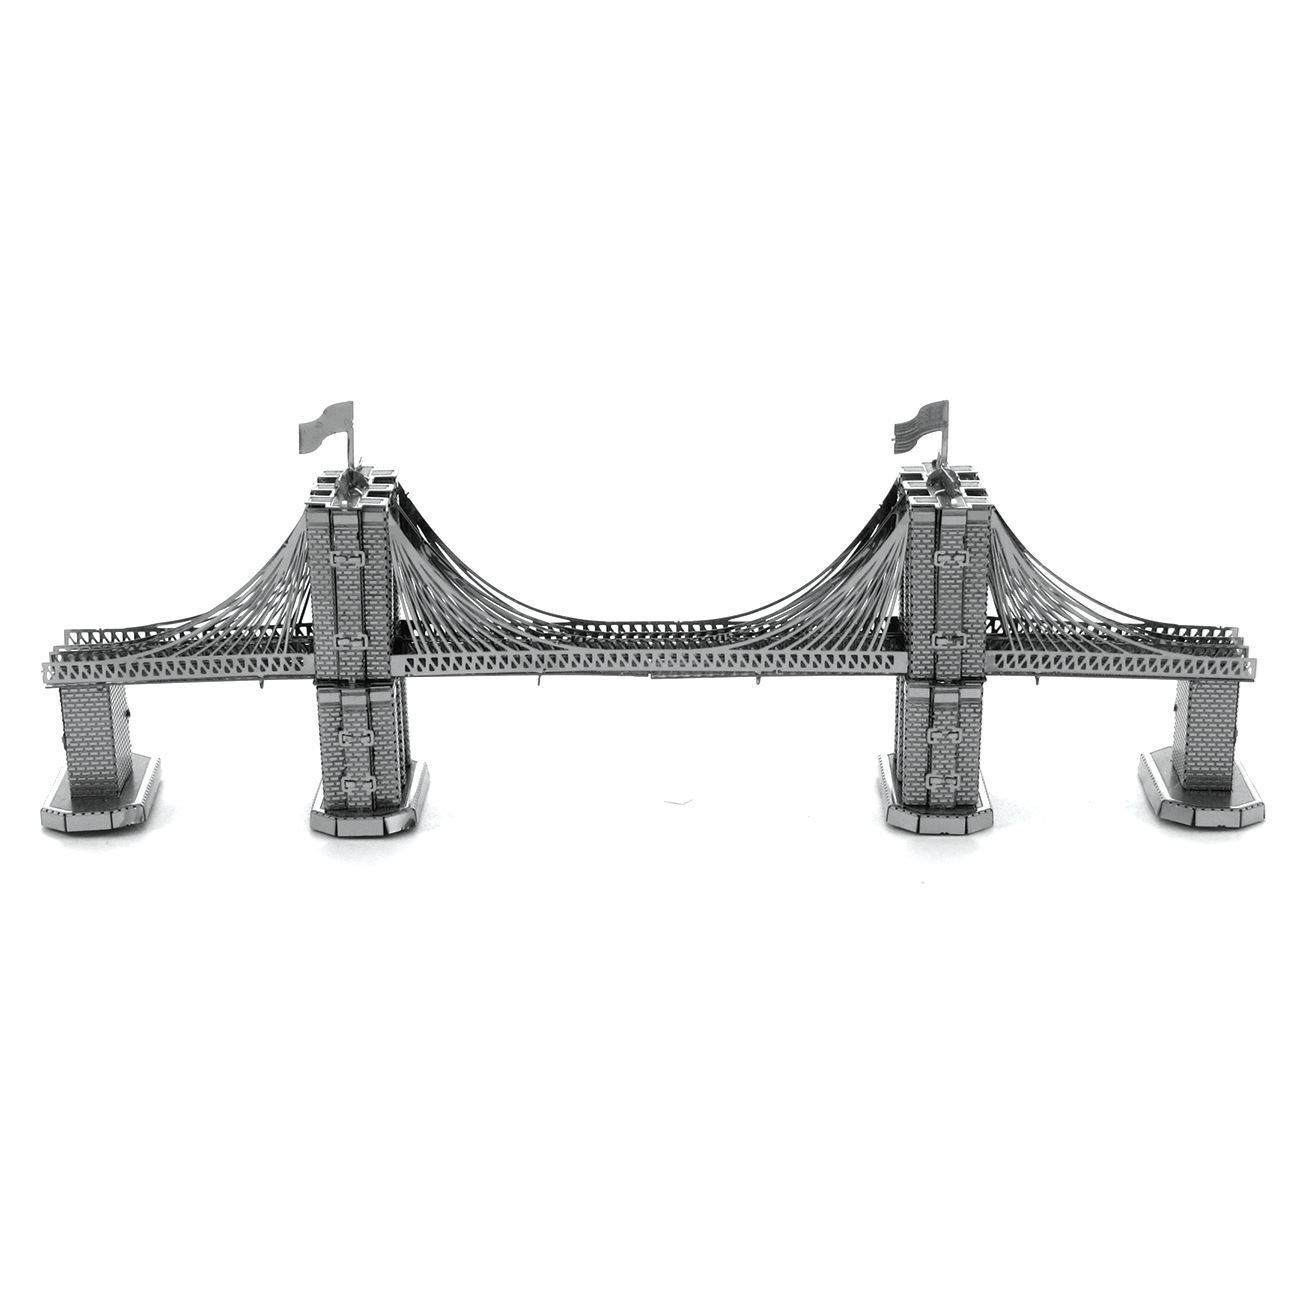 Detailed Architectural Model Brooklyn Bridge 1:450 Scale NYC New York City 